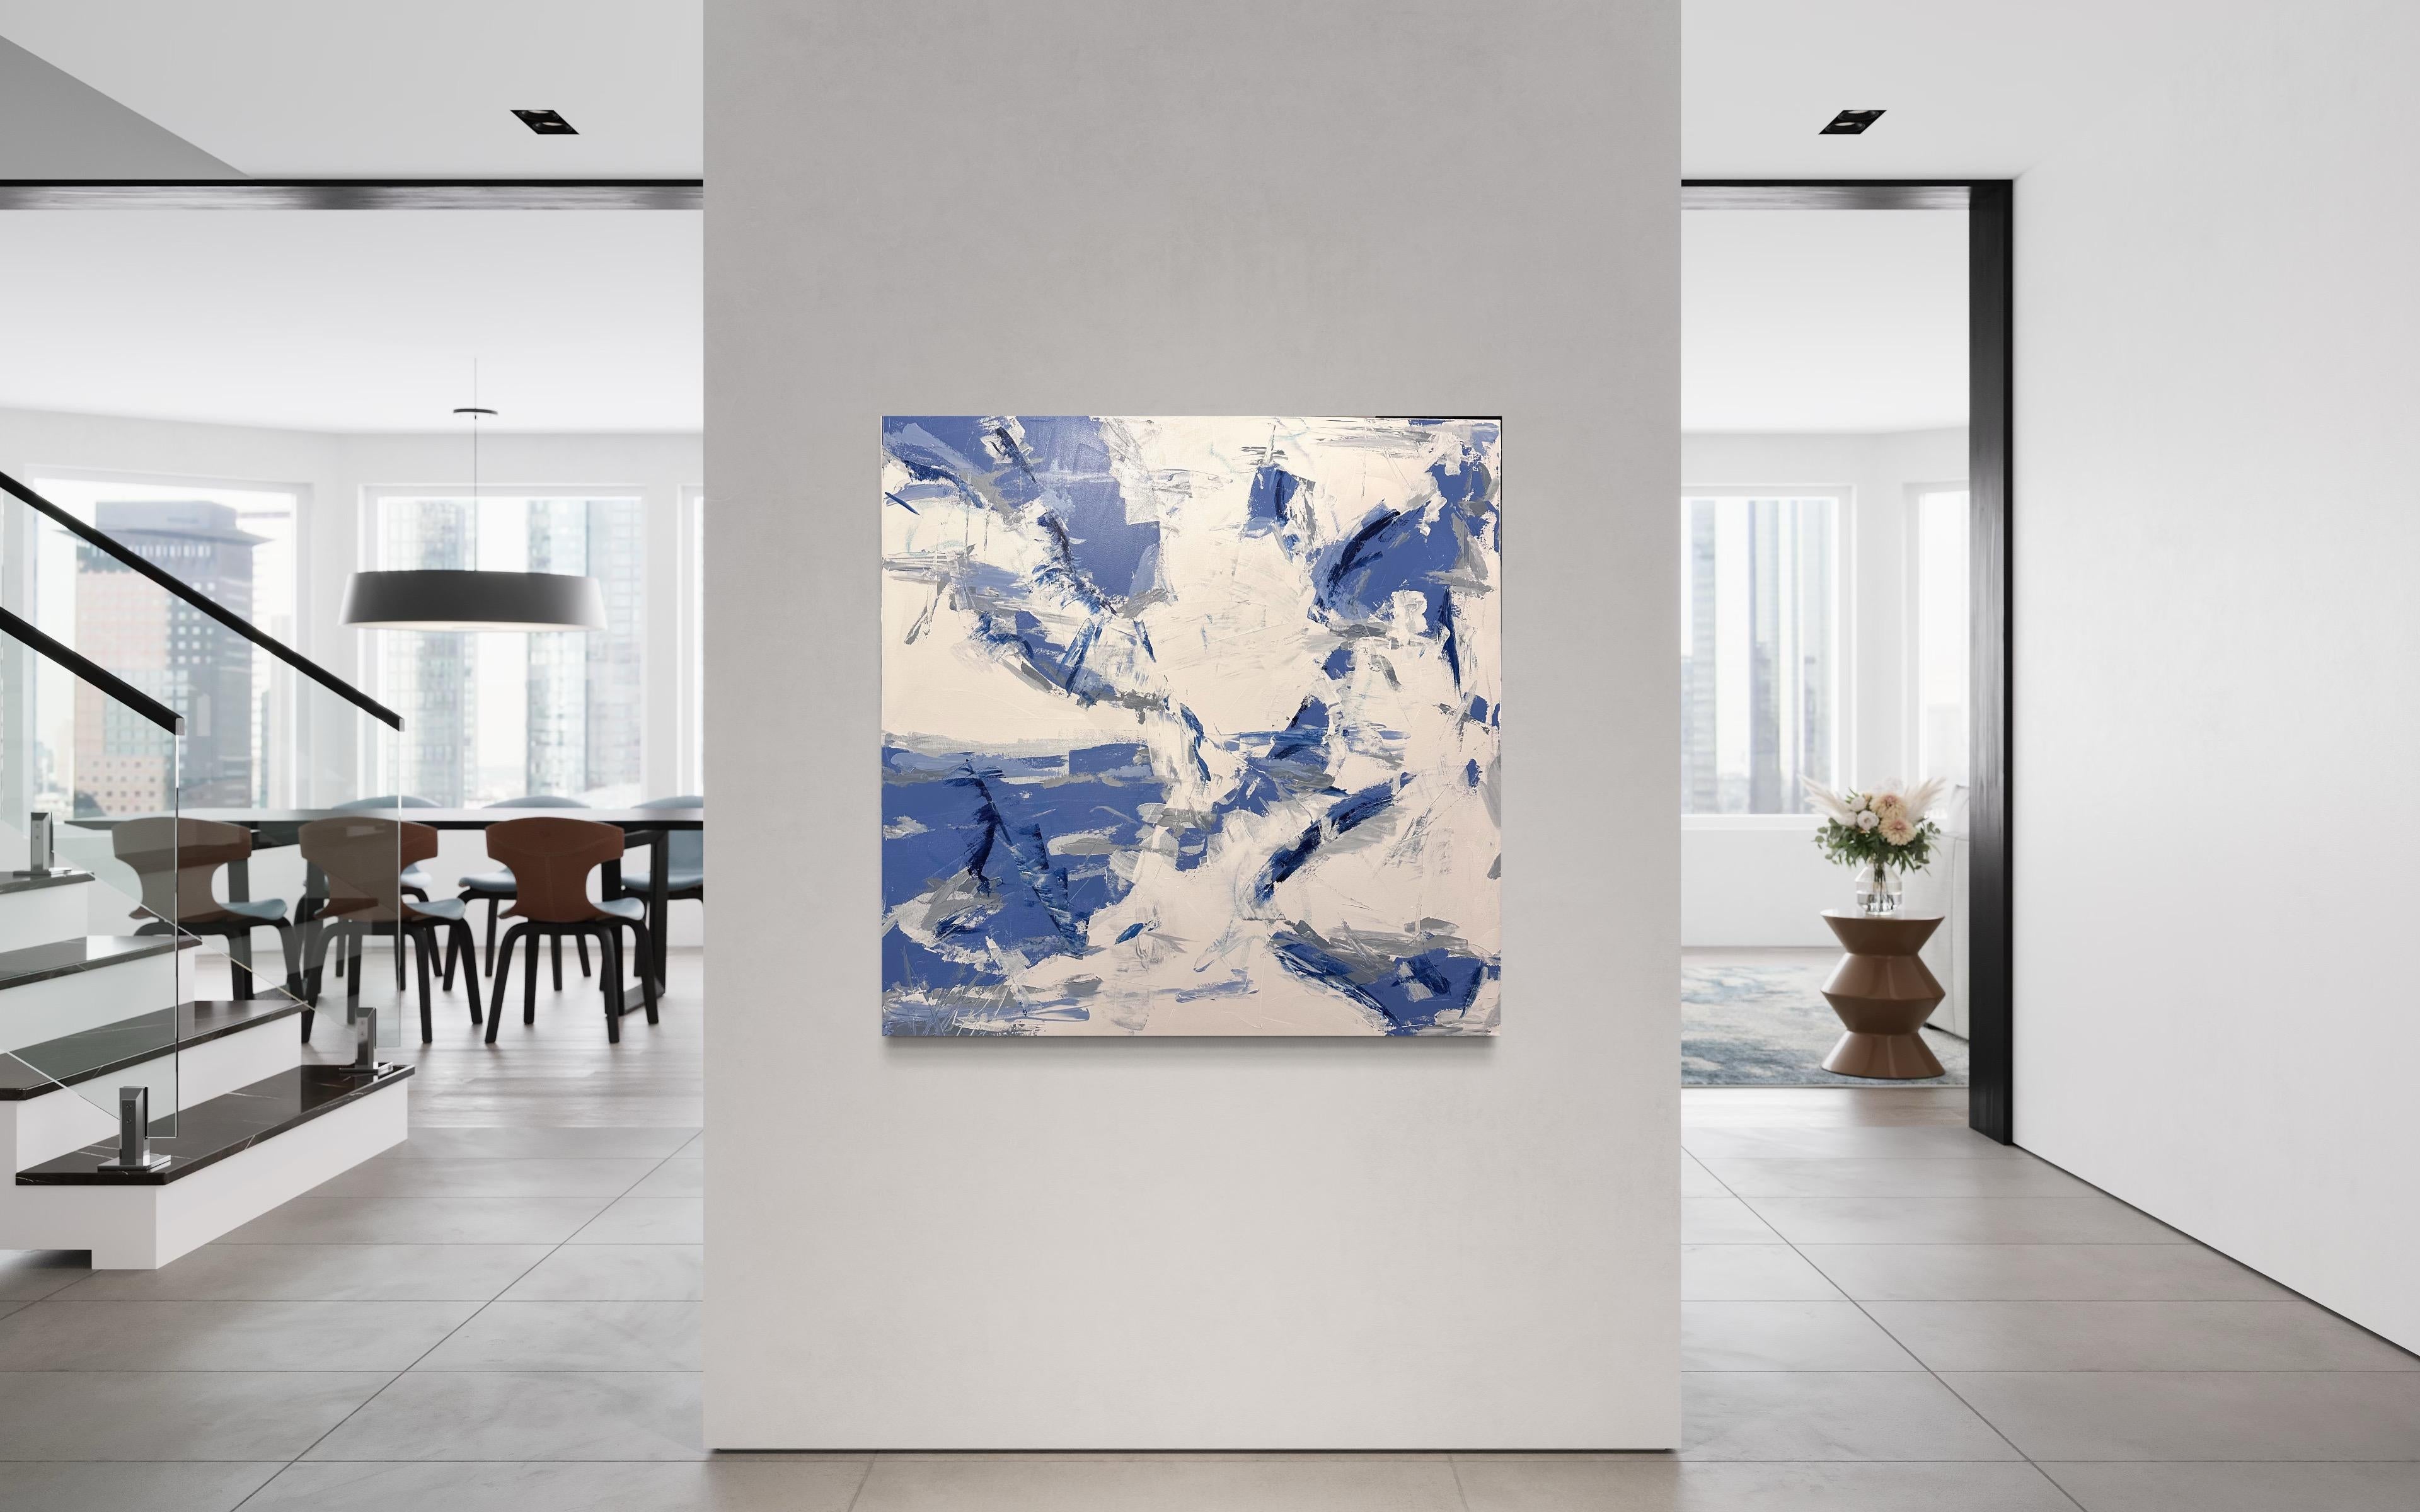 Kimberly Marney
Coastal (Blue, White, Abstract, Sky, Land, Sea, Landscape)
2023
Acrylic on Canvas
Size: 36x36x1.5in
Signed by hand
COA provided
Ref.: 924802-2004

Tags: Blue, White, Abstract, Sky, Land, Sea, Landscape

Multiple blues whites and